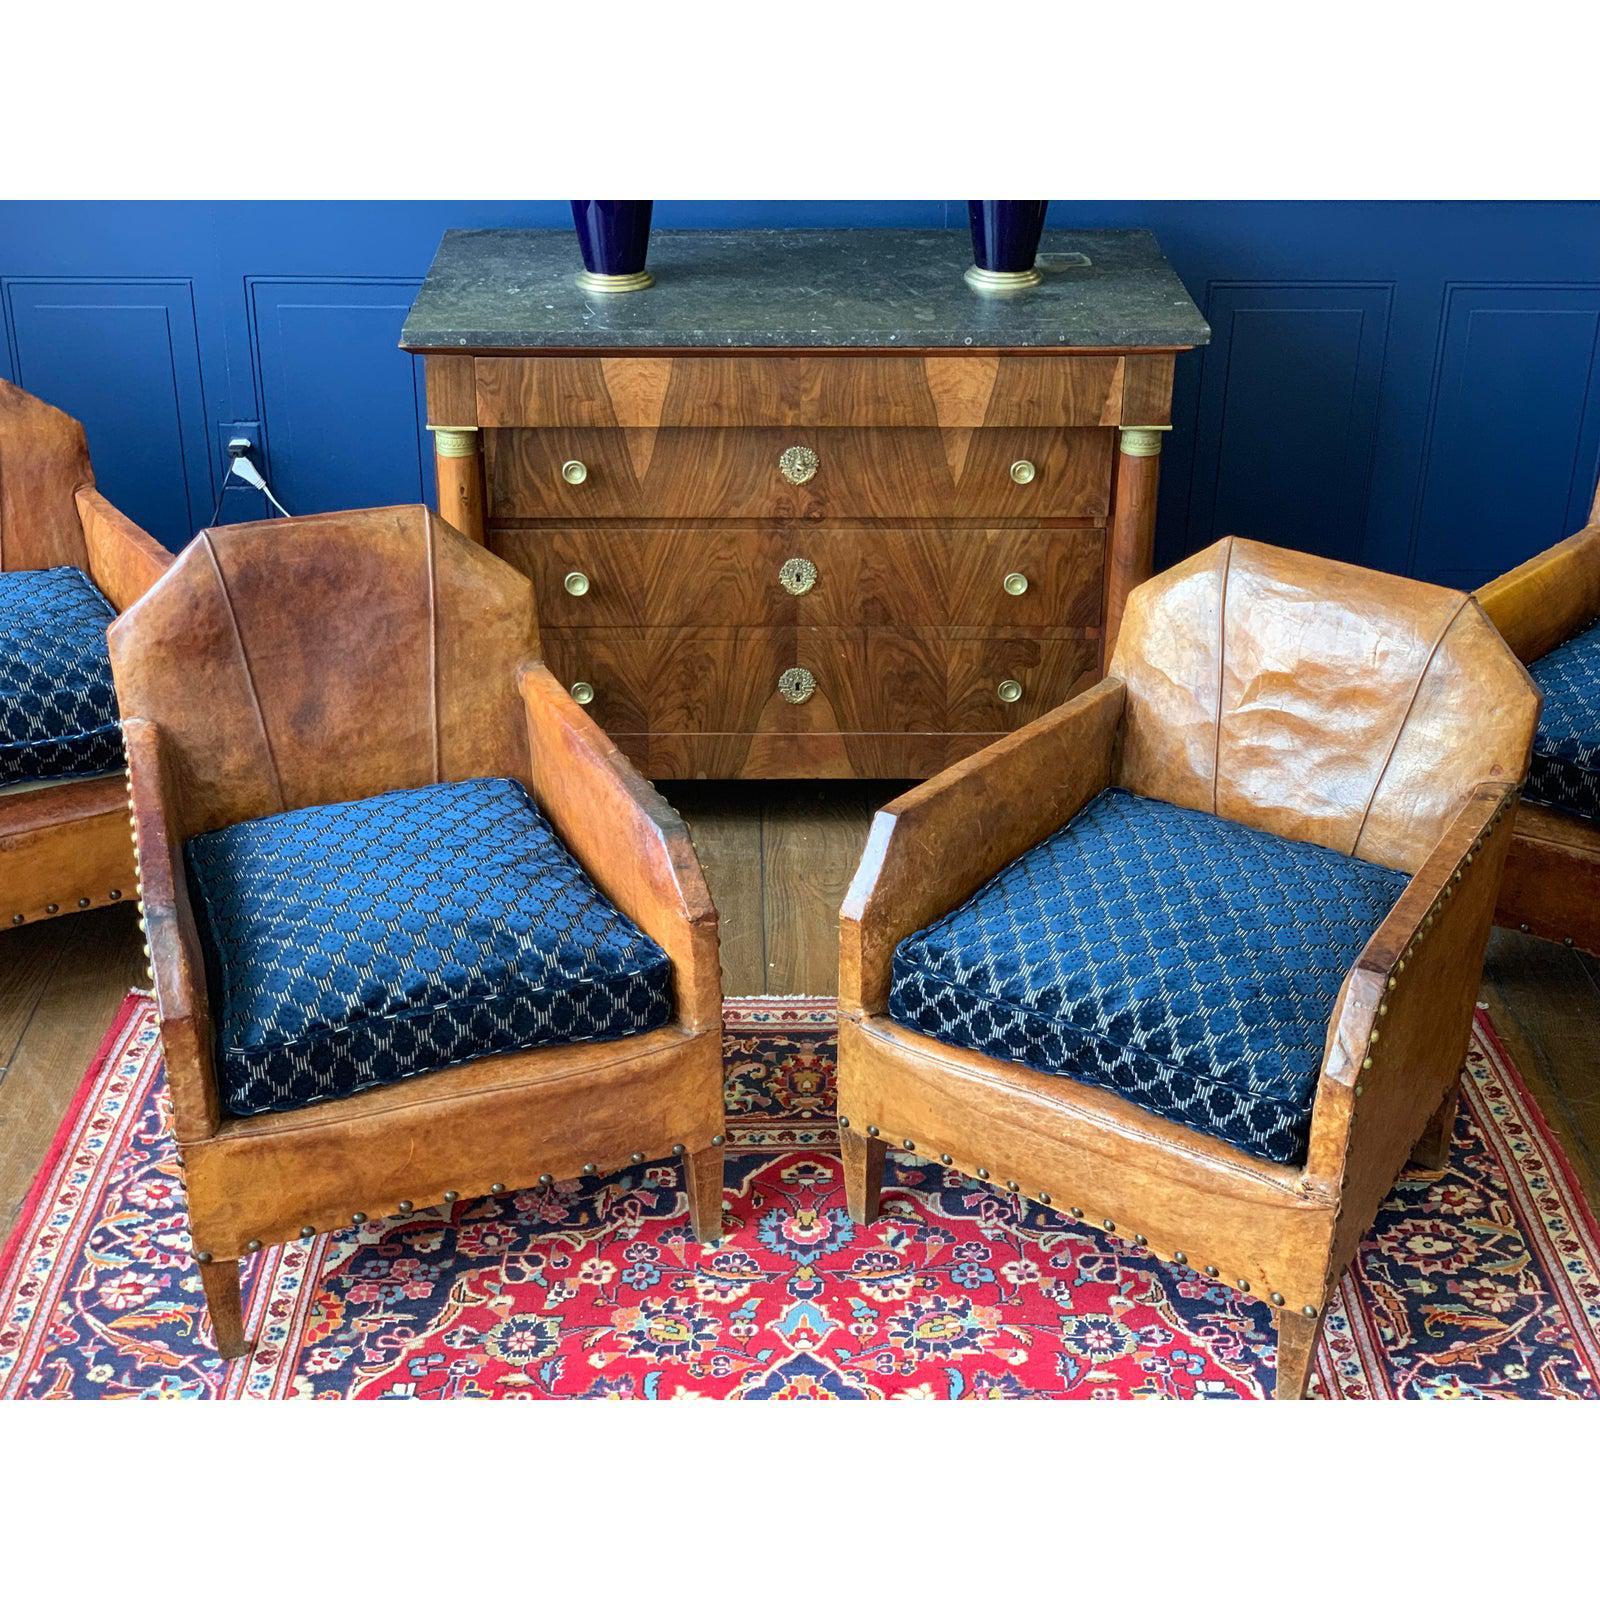 Set of 4 Art Deco leather chairs are from Paris, France, circa 1930. Cushions reupholstered with Christian LaCroix blue velvet fabric.
The chair features their original leather with a distressed and aged patina. The leather has wear and tear water